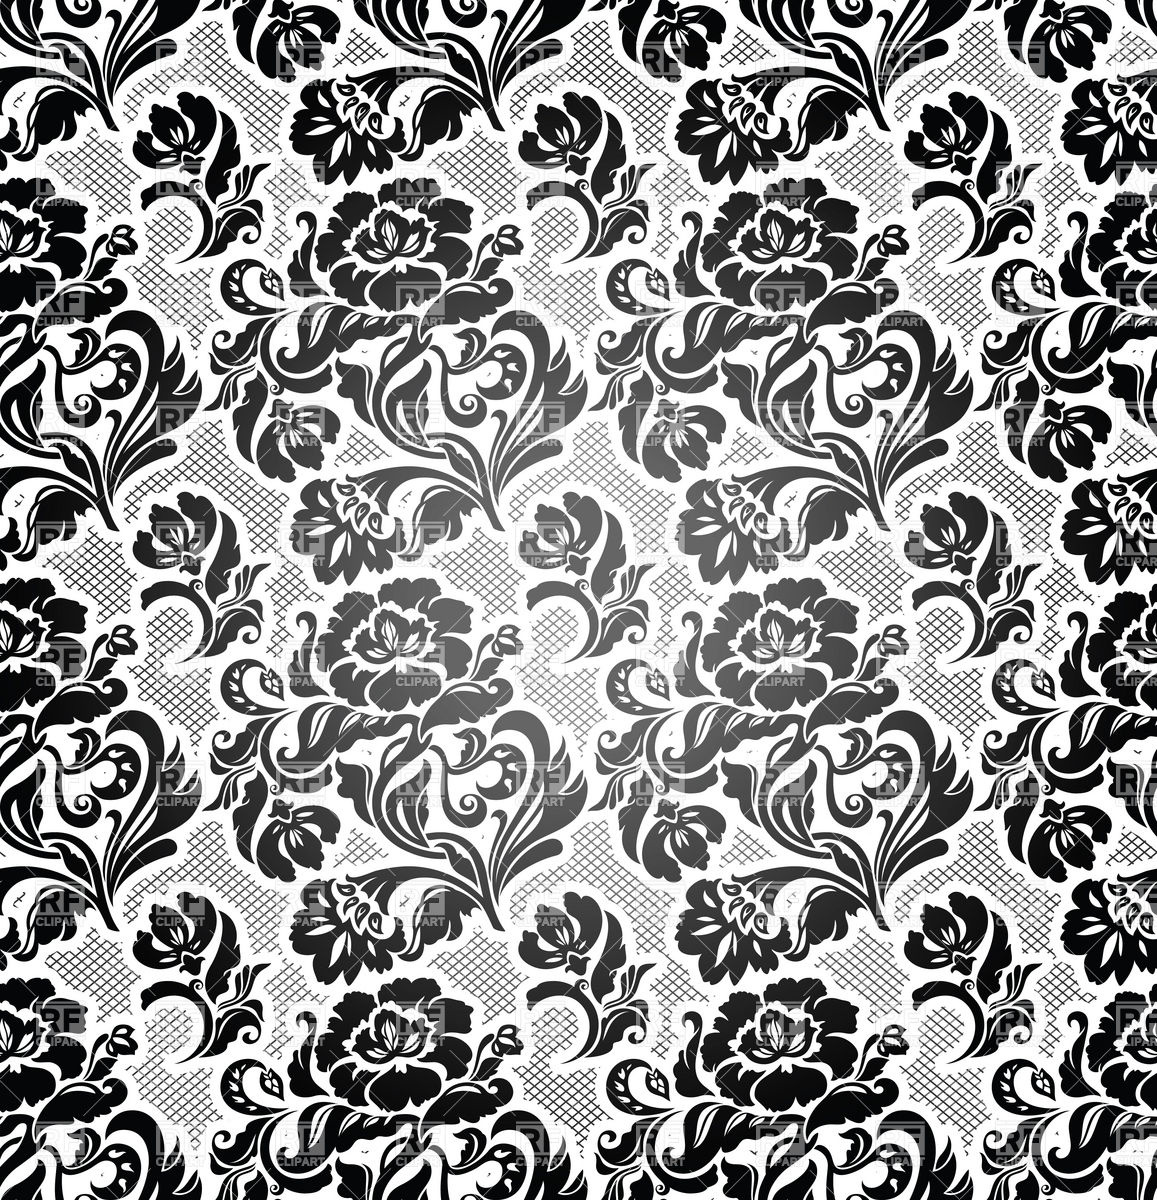 Victorian Black and White Floral Art